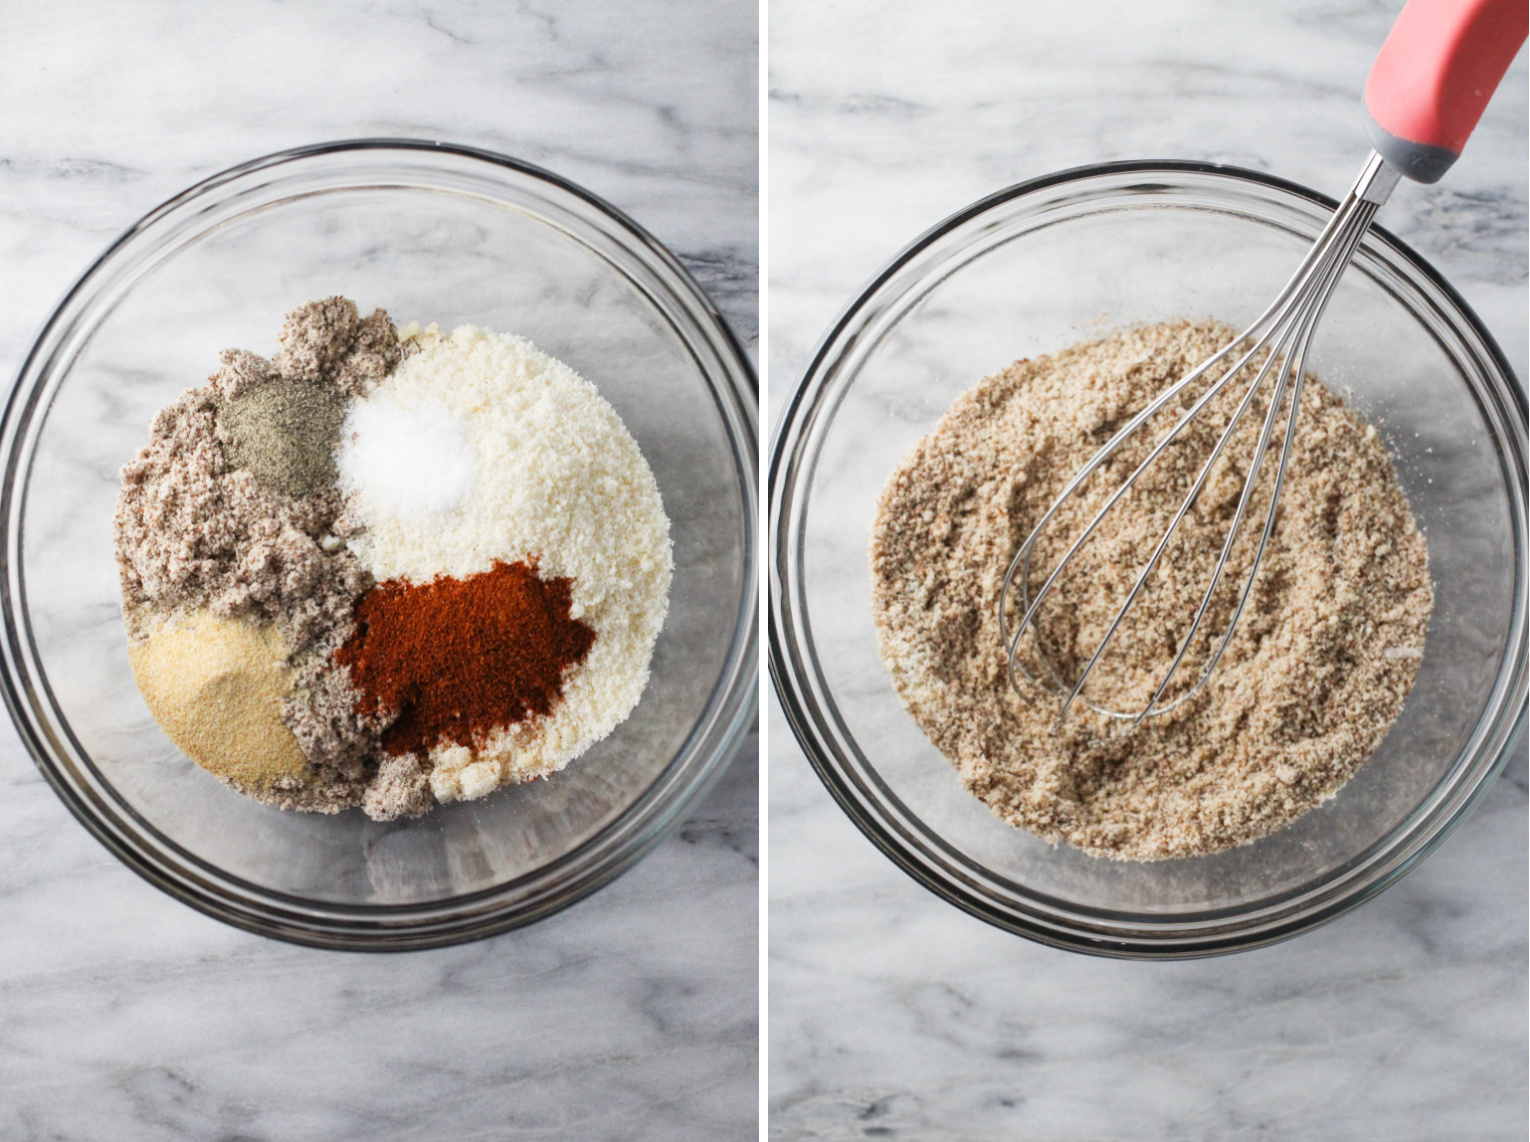 Two images side by side. Image on the left: a glass bowl with almond flour, parmesan, and spices. The image on the right: the almond flour mixture and a wisk in a glass bowl.